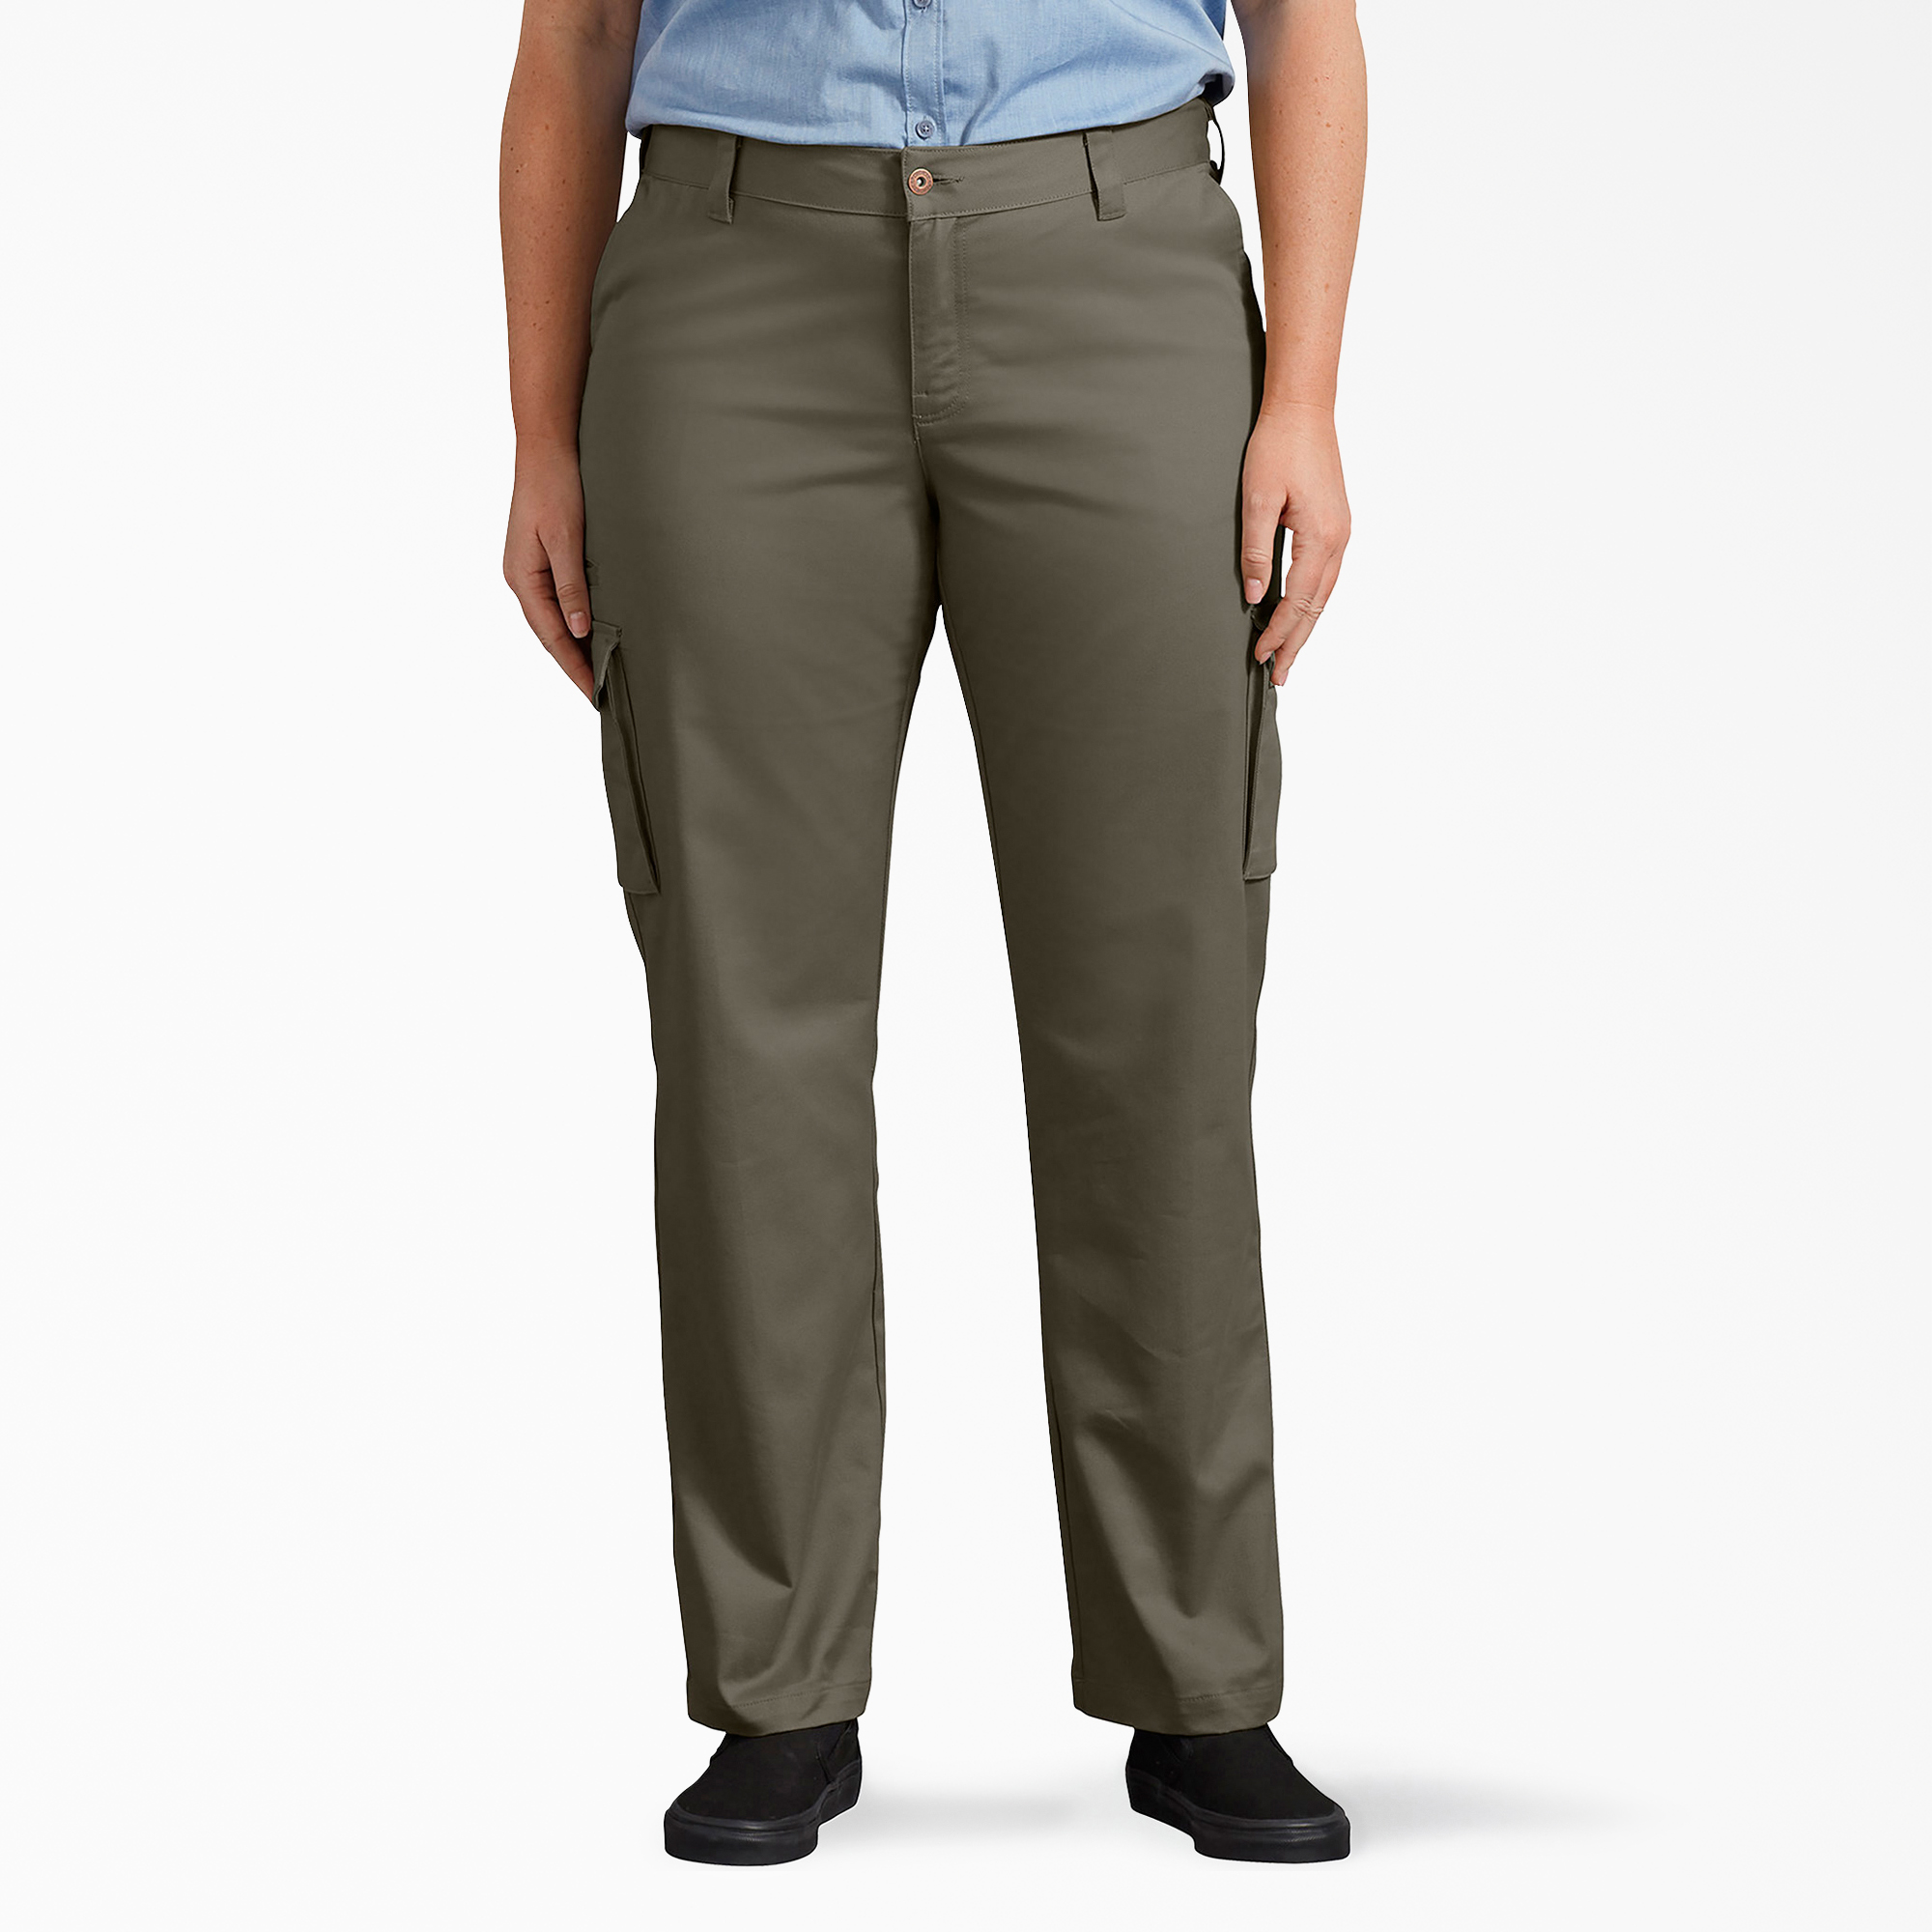 Women’s Plus Stretch Relaxed Cargo Pants - Grape Leaf (GE)